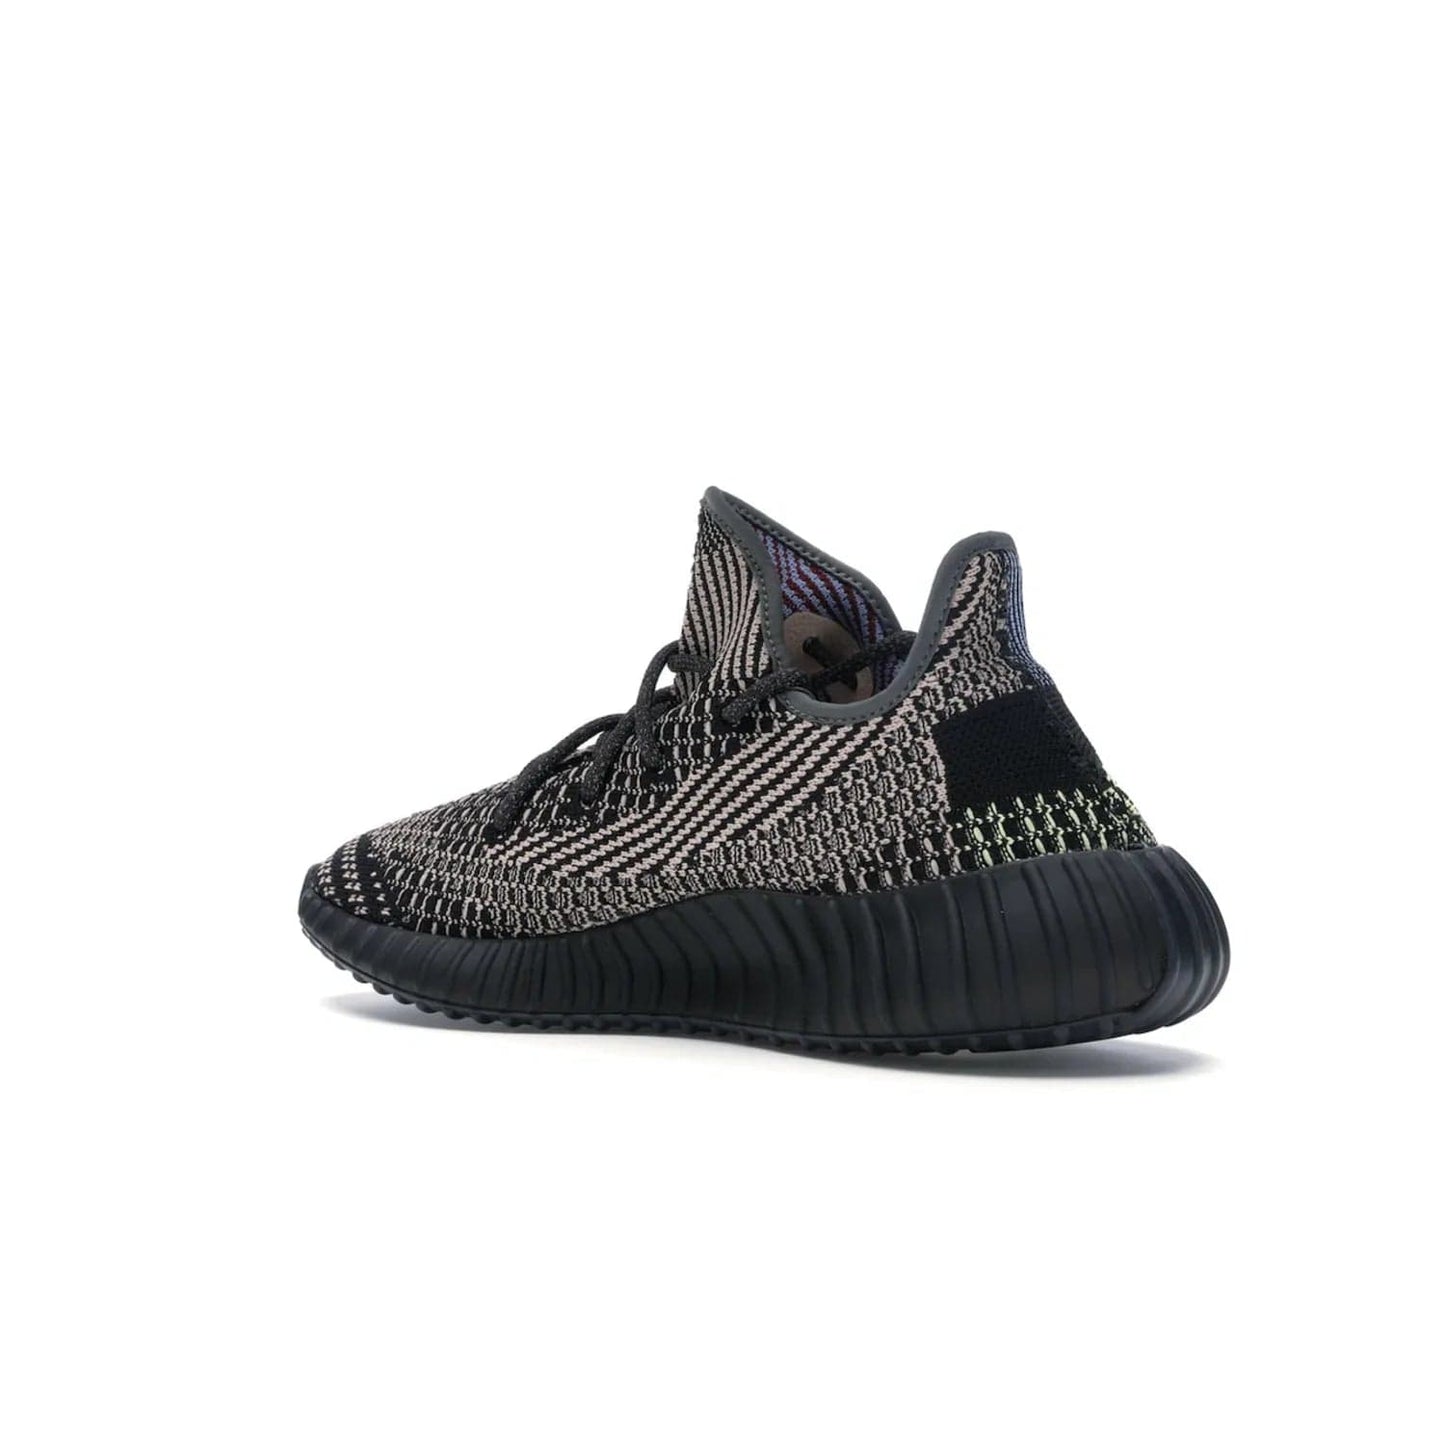 adidas Yeezy Boost 350 V2 Yecheil (Non-Reflective) - Image 23 - Only at www.BallersClubKickz.com - Make a statement with the eye-catching adidas Yeezy Boost 350 V2 Yecheil Non-Reflective. Featuring a spectrum of colorful hues, black upper, Boost cushioning, and black side stripe, the sneaker brings a luxe yet playful finish to any outfit.